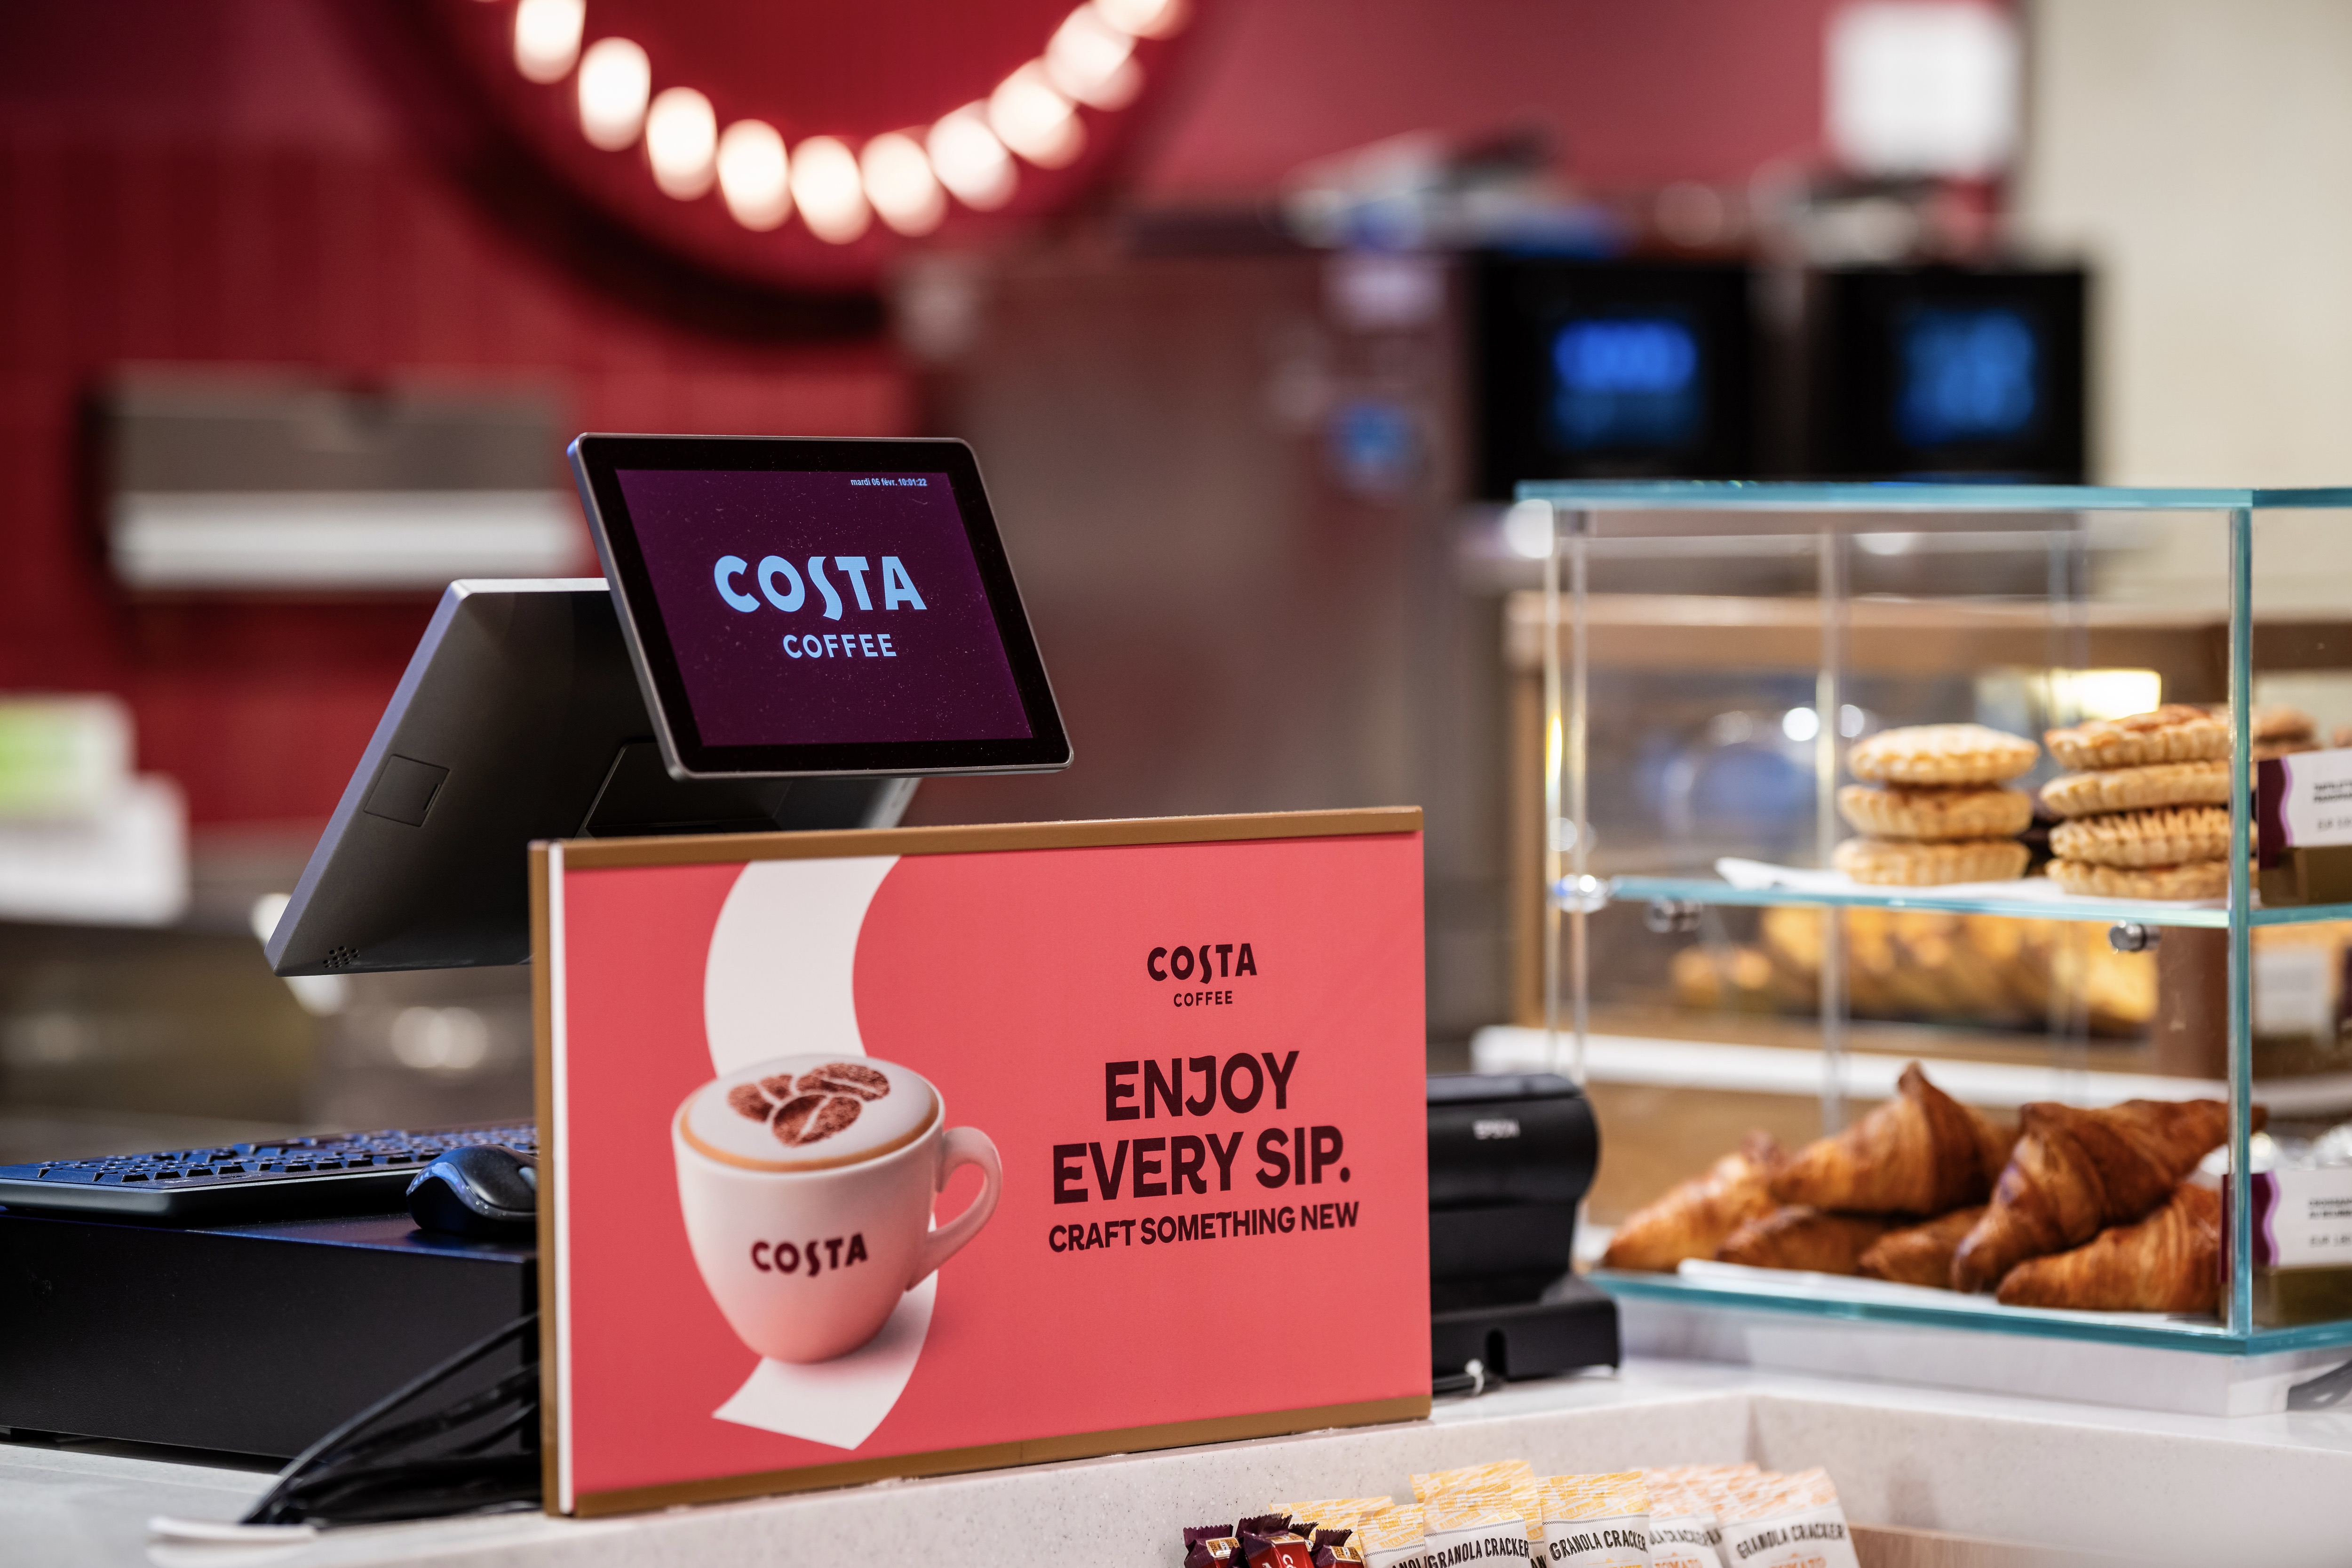 LUIK, BELGIE - FEBRUARY 06 :
Illustration images during a press event of the opening of the first store of Costa Coffee in Belgium.  On 06, February, 2024 in Luik, Belgie, 06/02/2024  

© Gregory Van Gansen/Imagetting